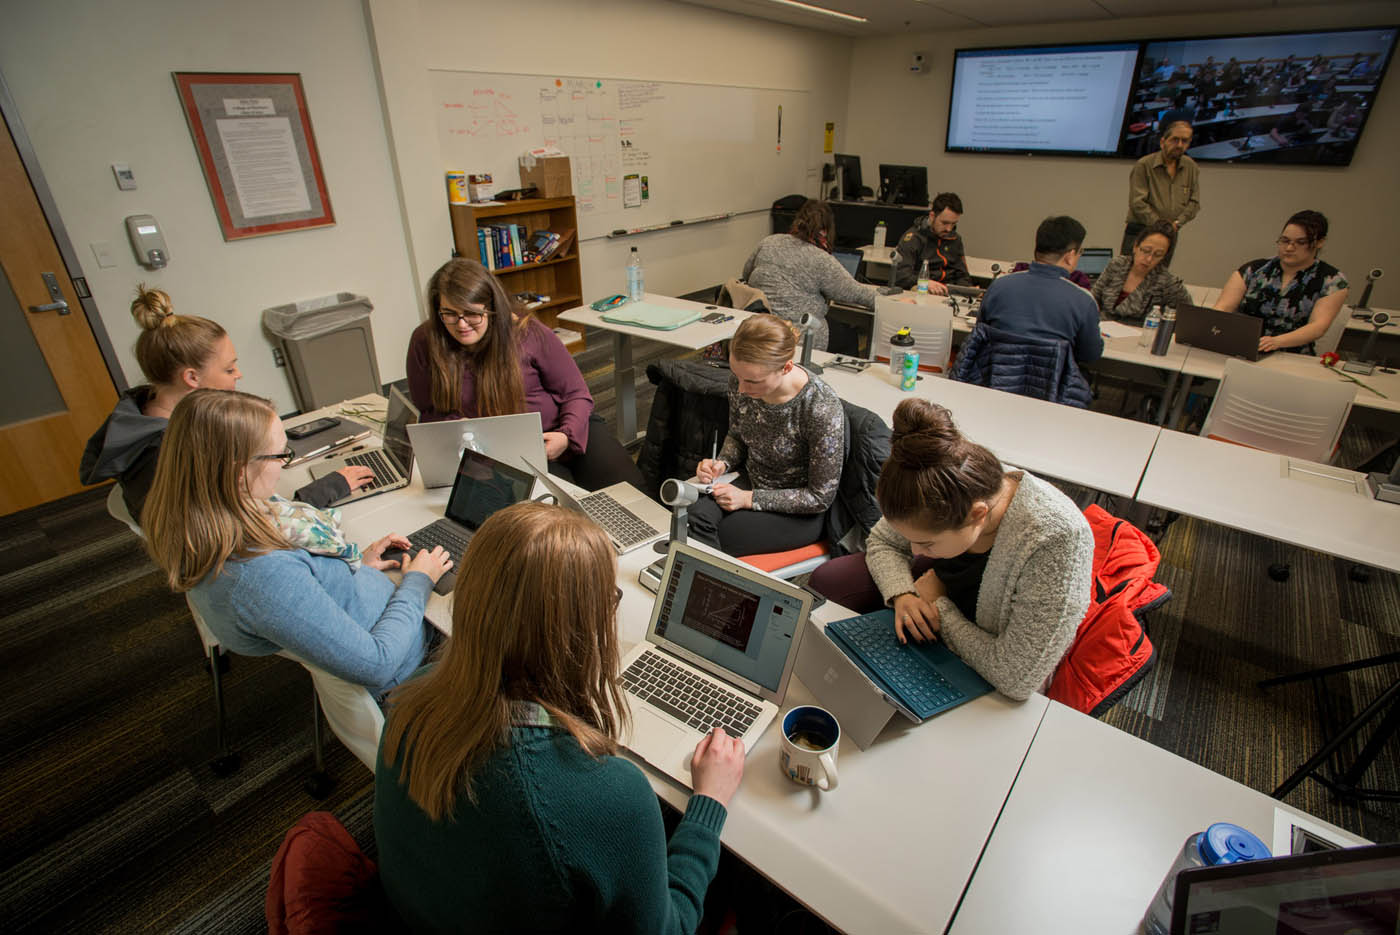 Students working together on laptops in a lecture